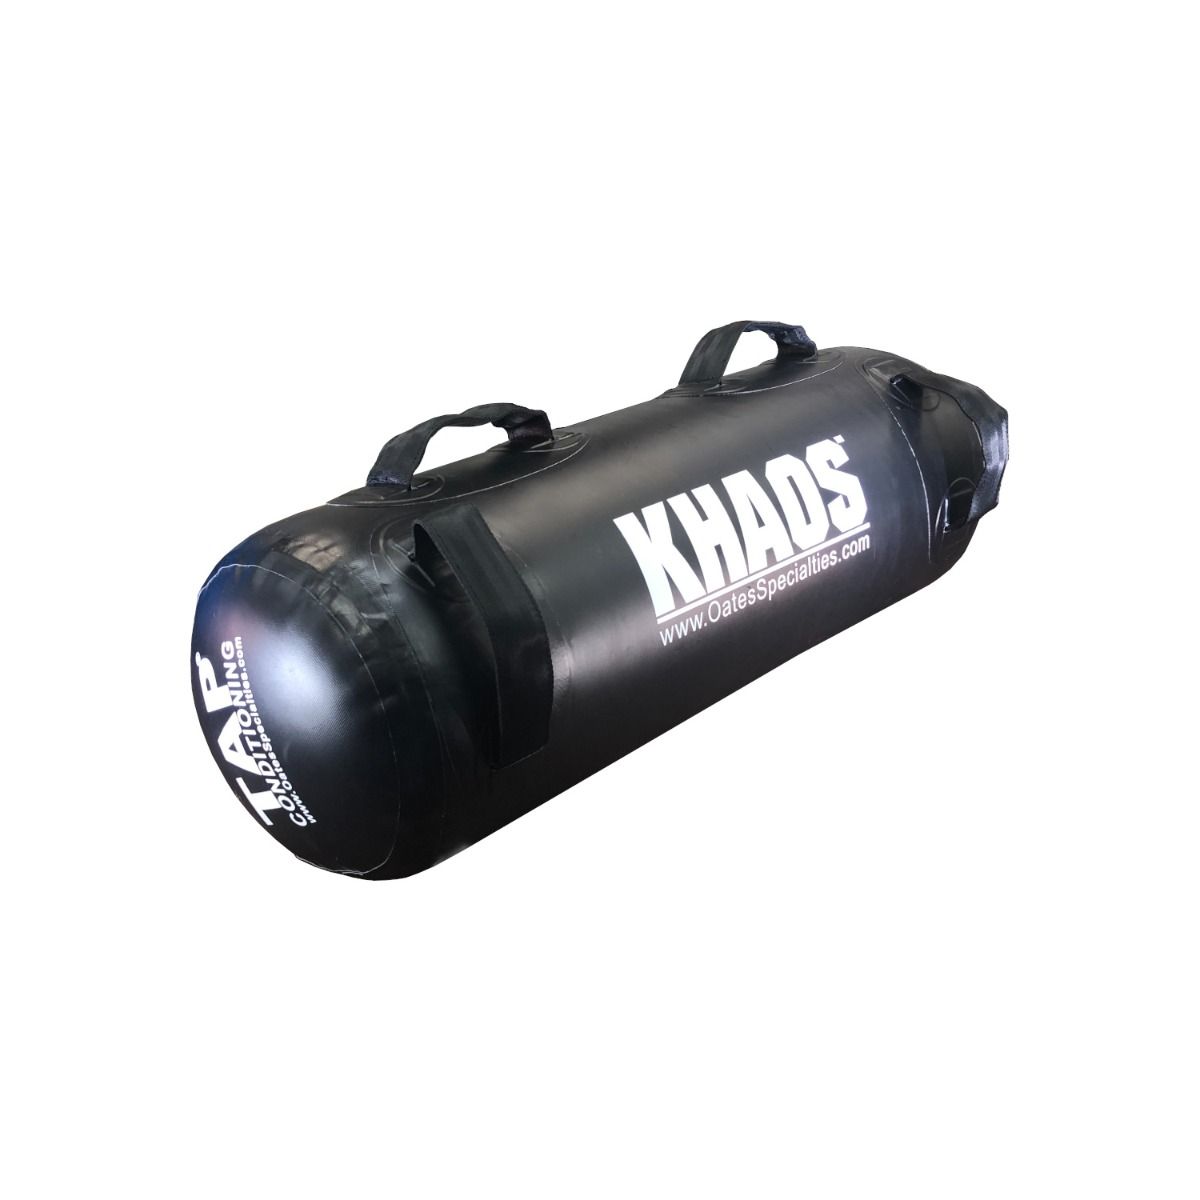 Khaos® Water Products